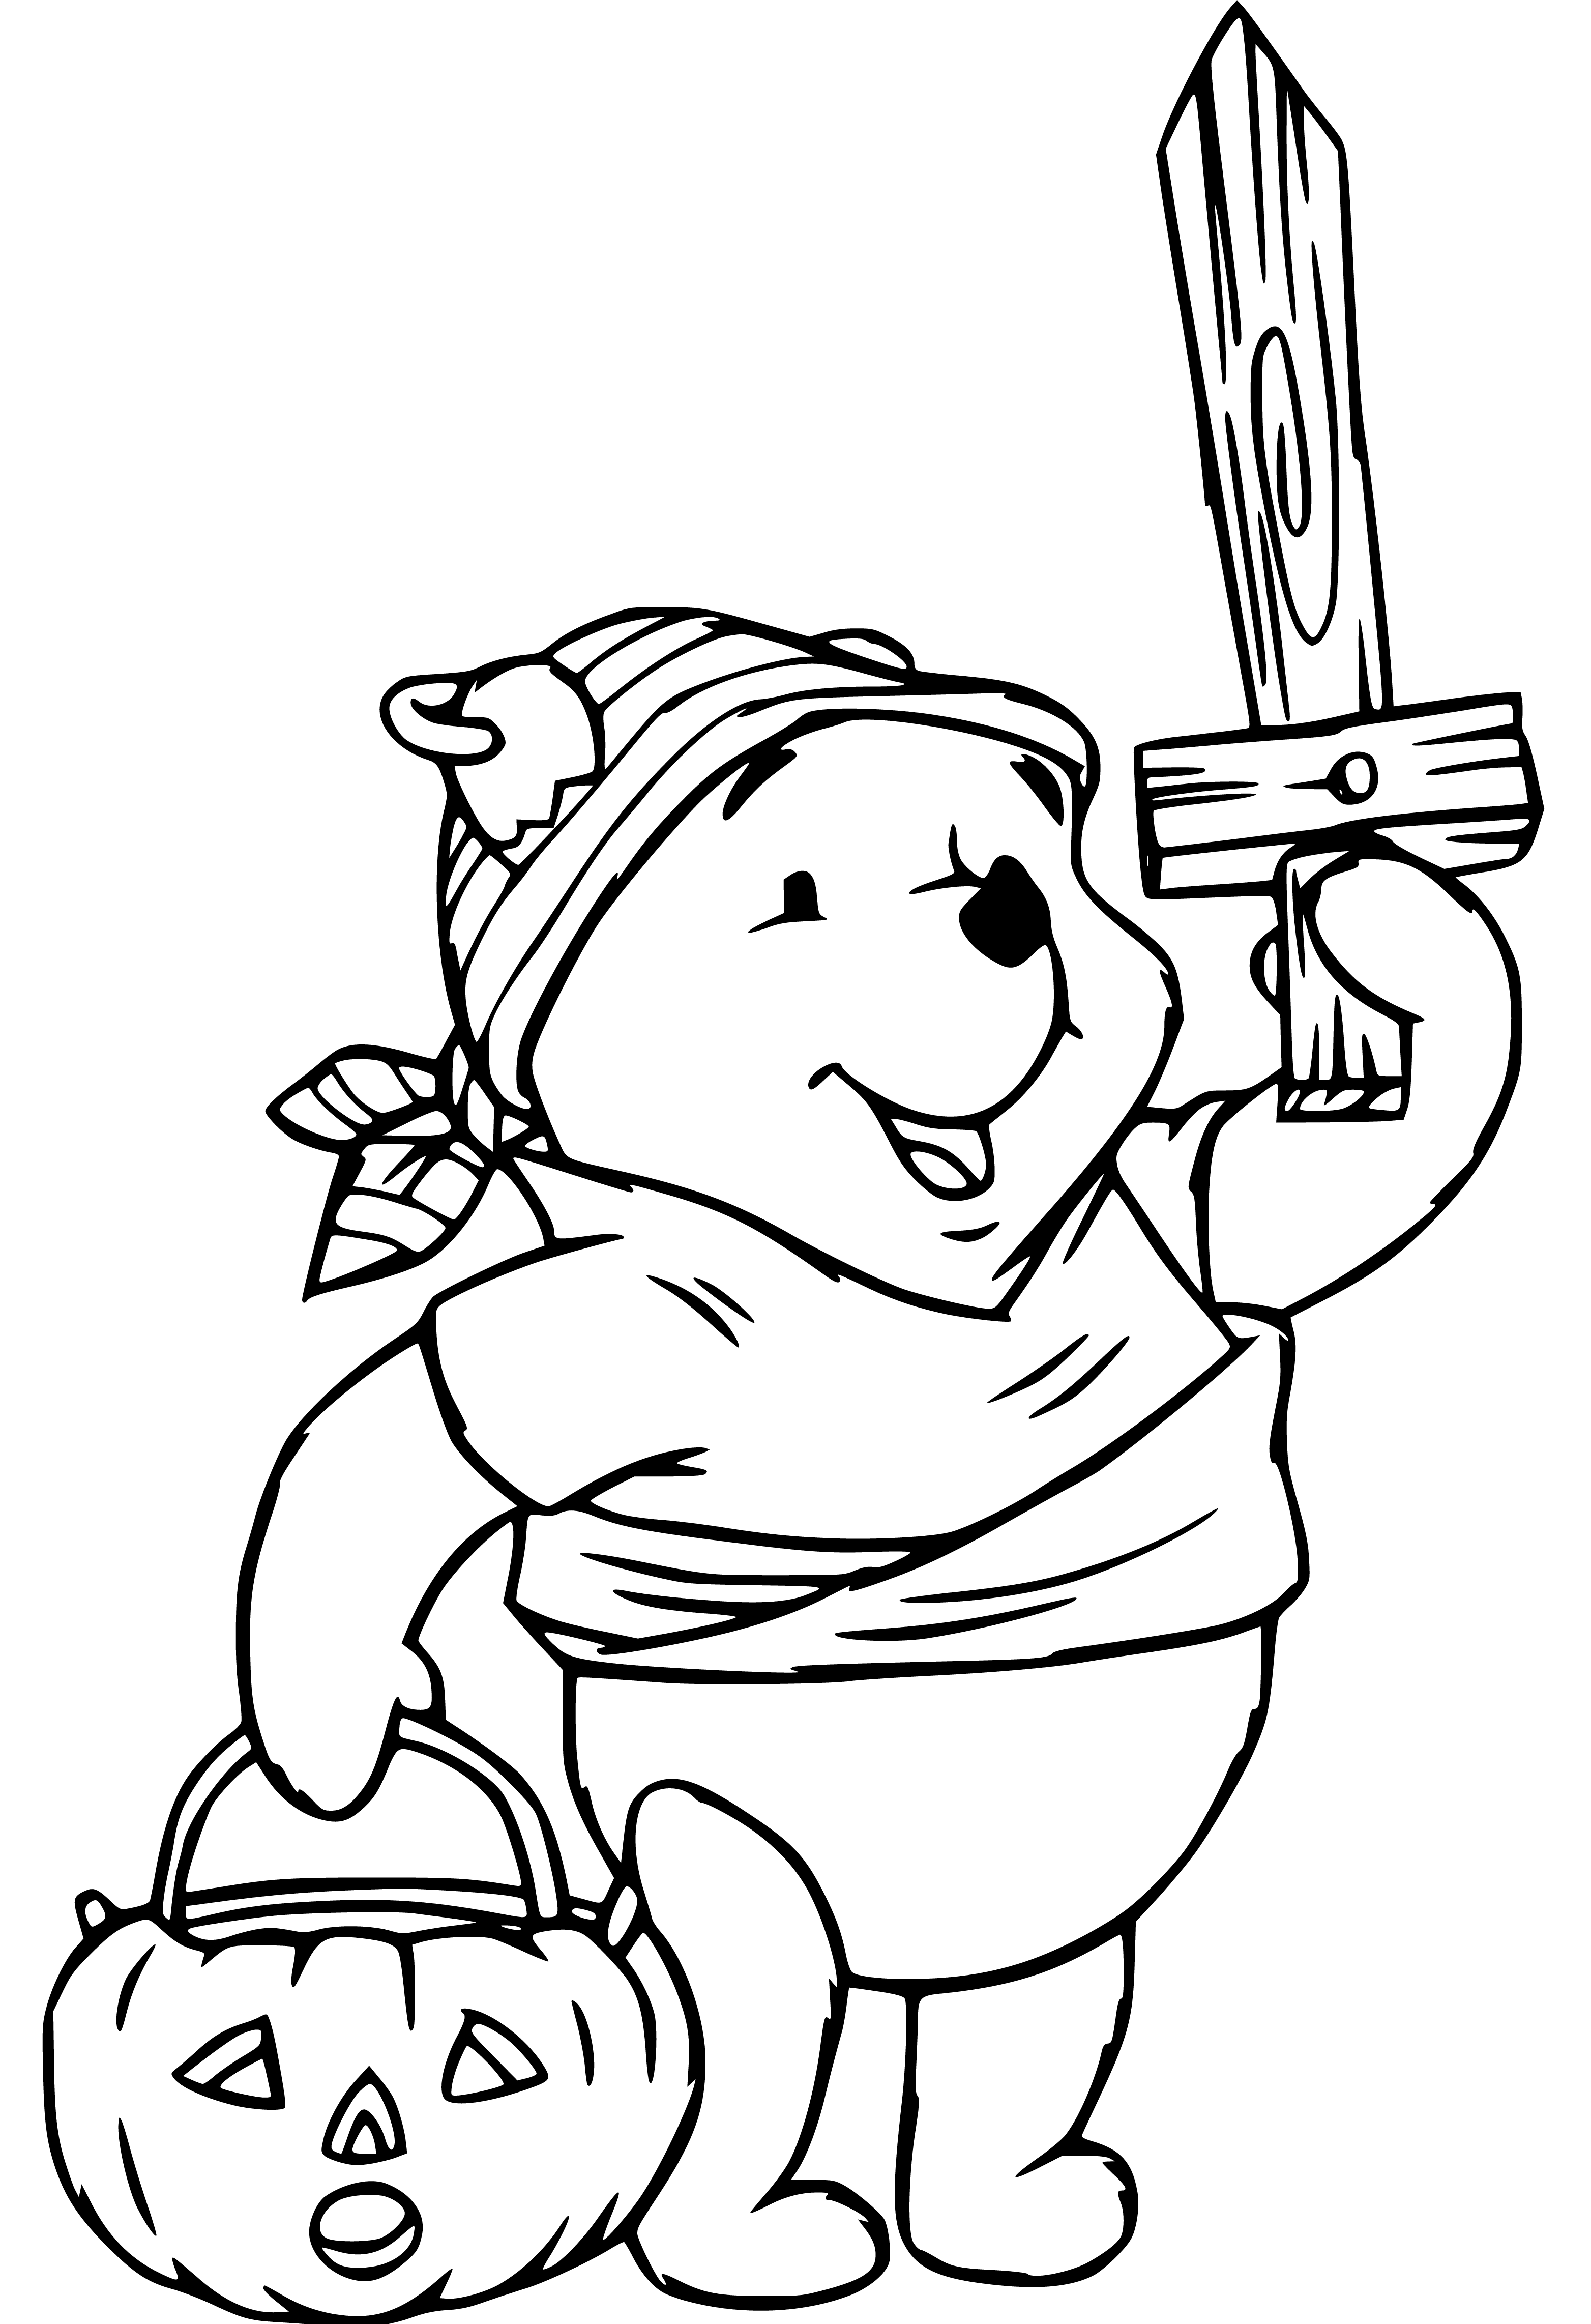 Winnie The Pooh Halloween Coloring Pages - SheetalColor.com